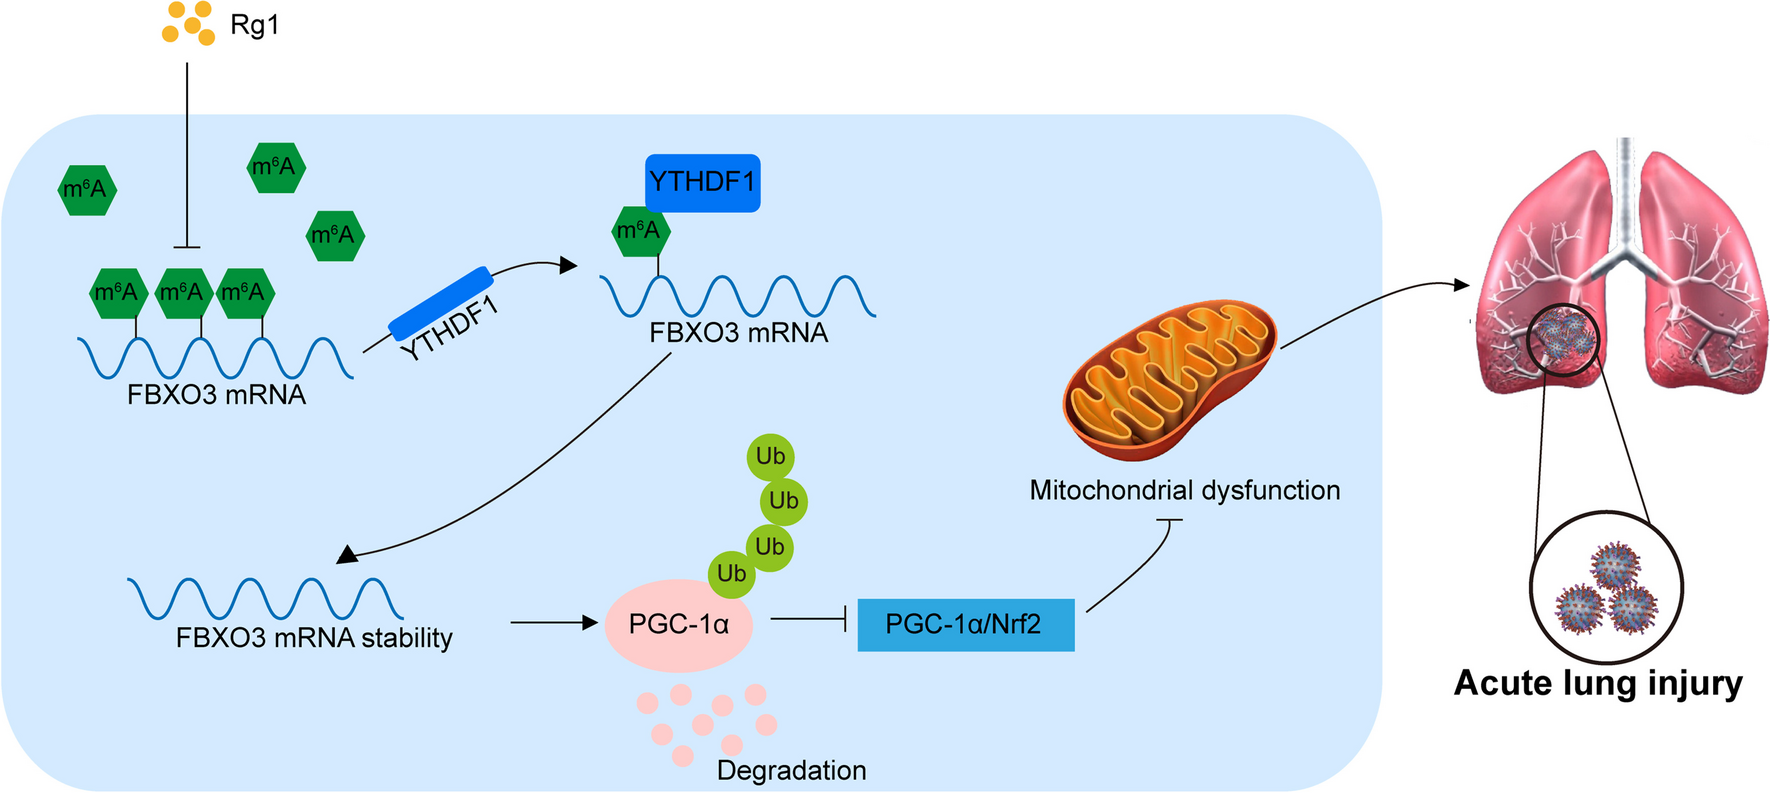 Ginsenoside Rg1 Alleviates Sepsis-Induced Acute Lung Injury by Reducing FBXO3 Stability in an m6A-Dependent Manner to Activate PGC-1α/Nrf2 Signaling Pathway